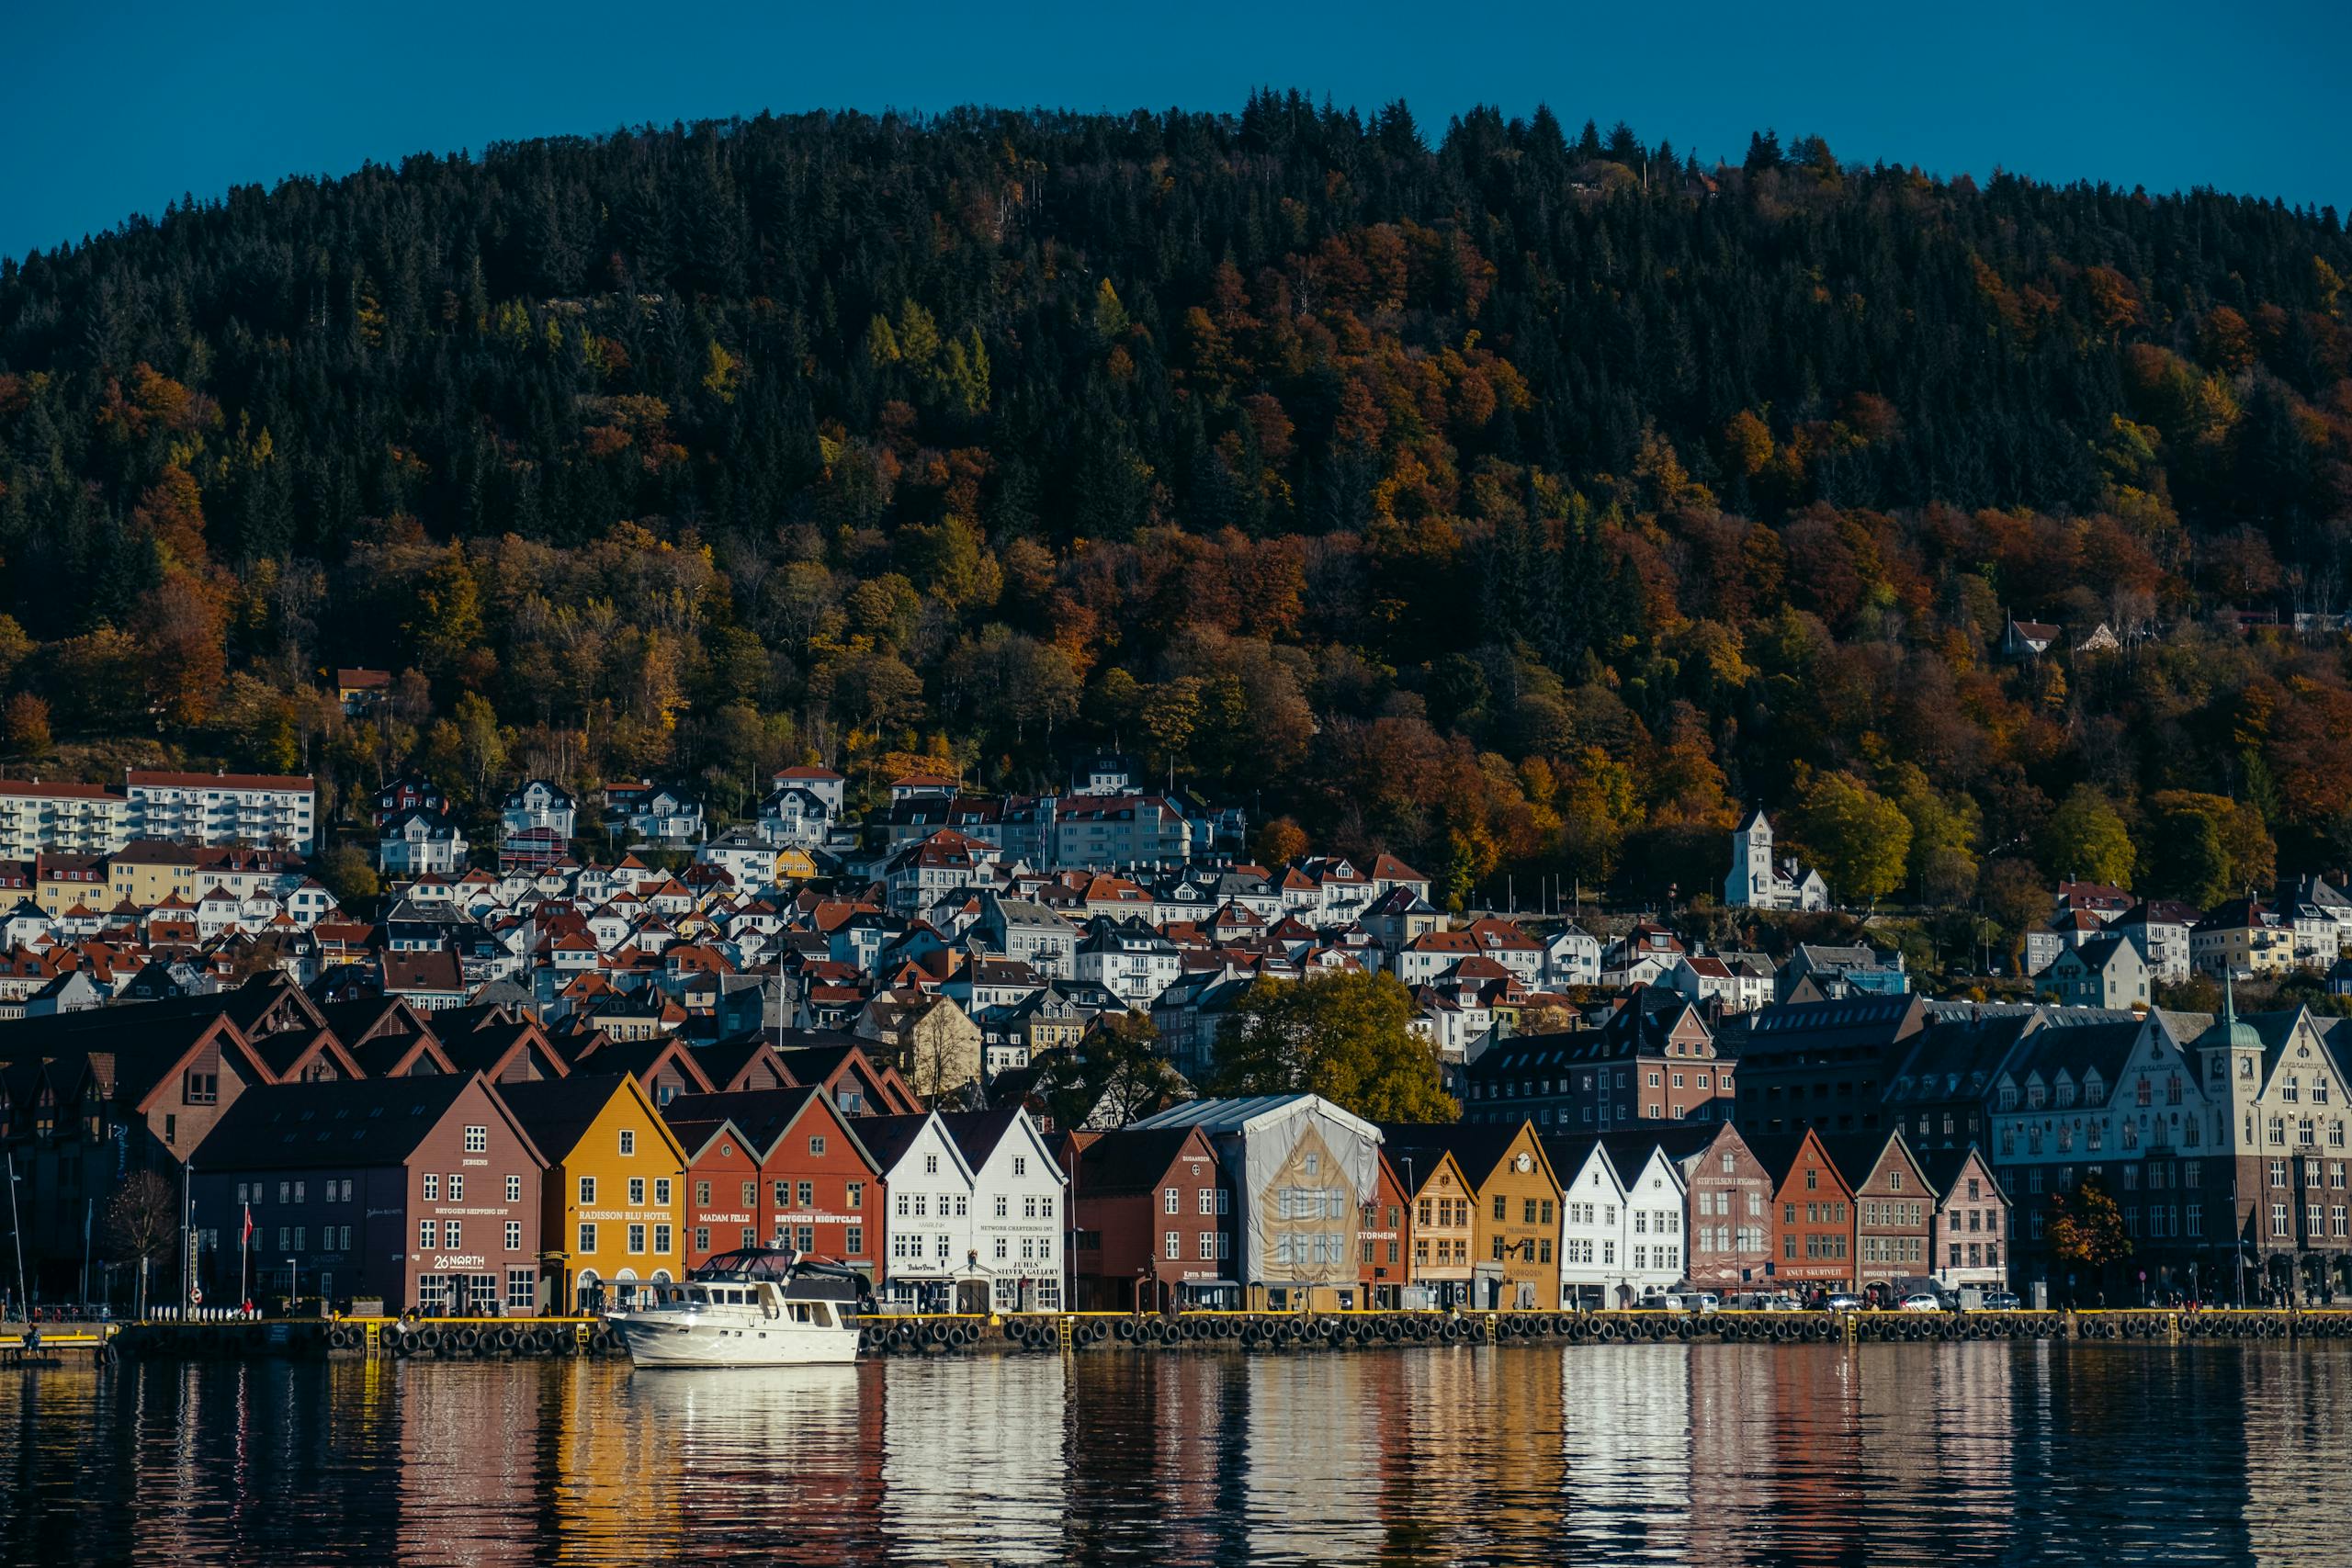 Eating Your Way Through Bergen, Norway – Food Tour Recommendations